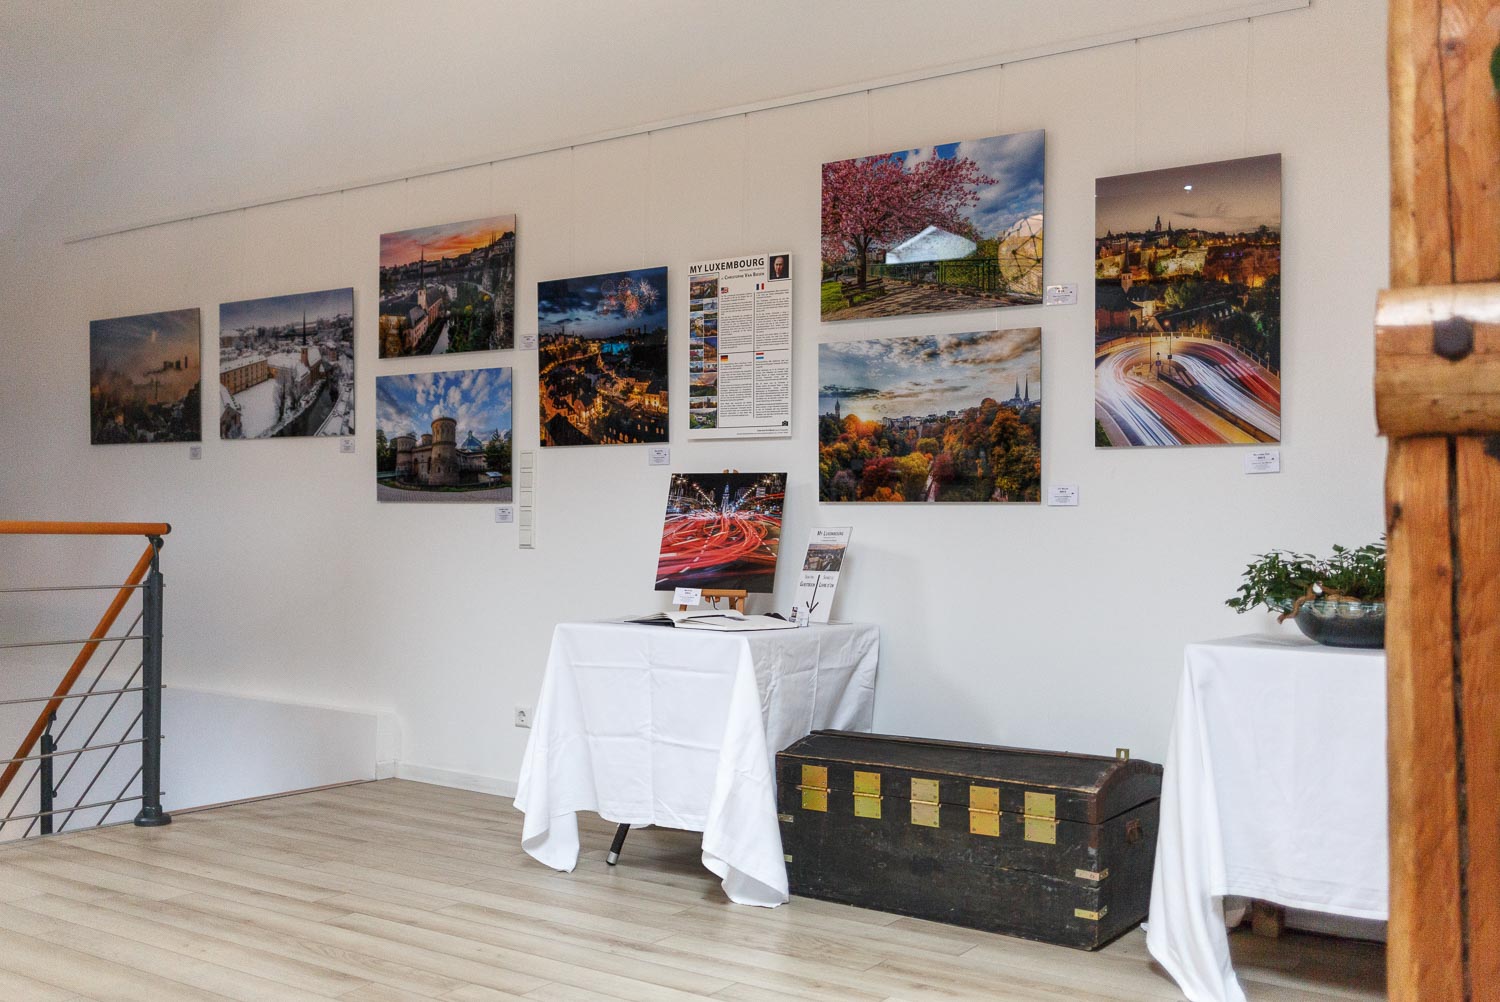 Photography exhibition at the Yves Radelet in Drauffelt in the North of Luxembourg - Photography by Christophe Van Biesen - Landscape and Travel Photographer from Luxembourg